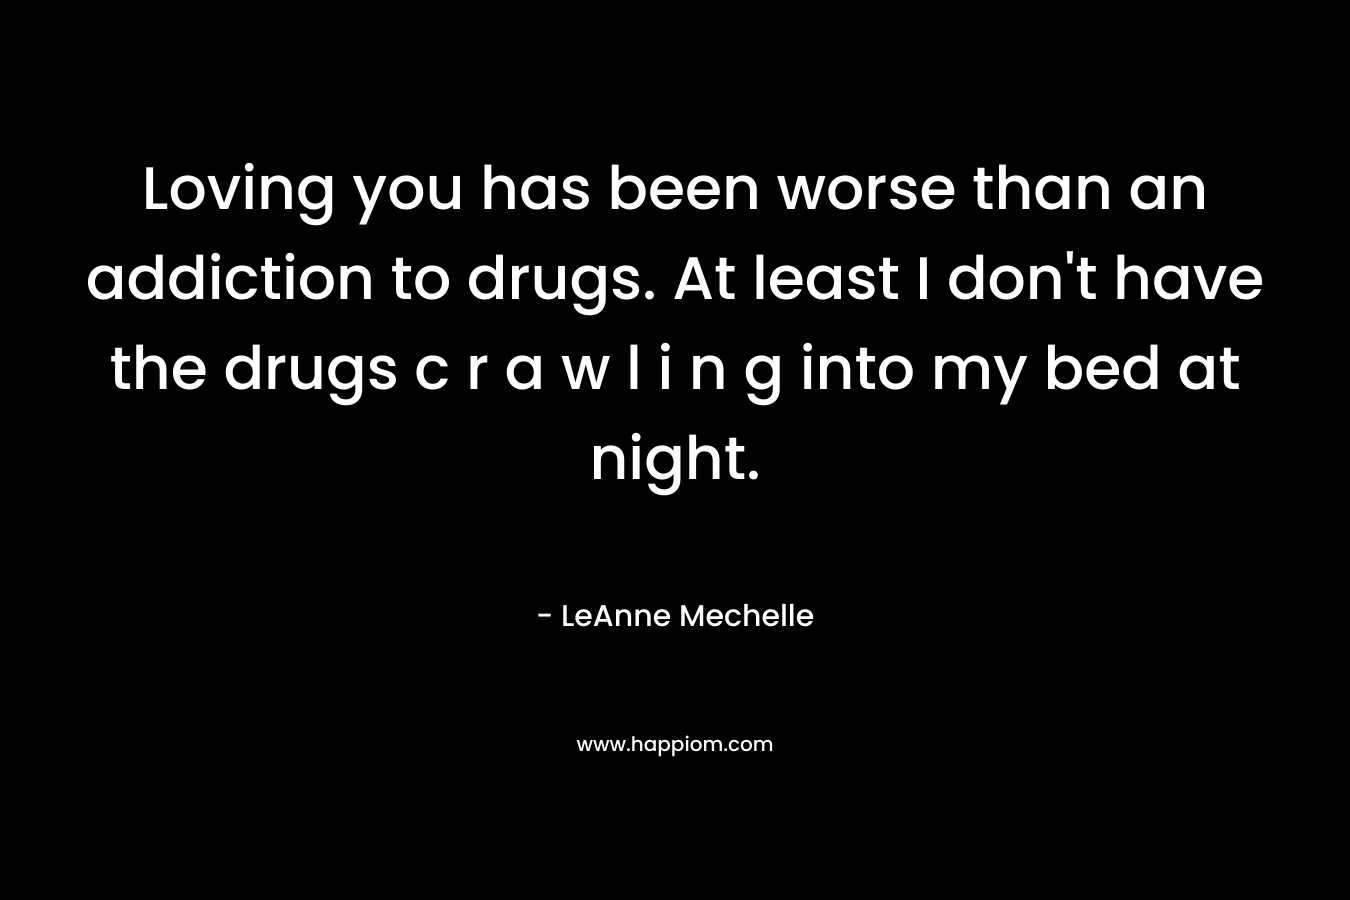 Loving you has been worse than an addiction to drugs. At least I don’t have the drugs c r a w l i n g into my bed at night. – LeAnne Mechelle